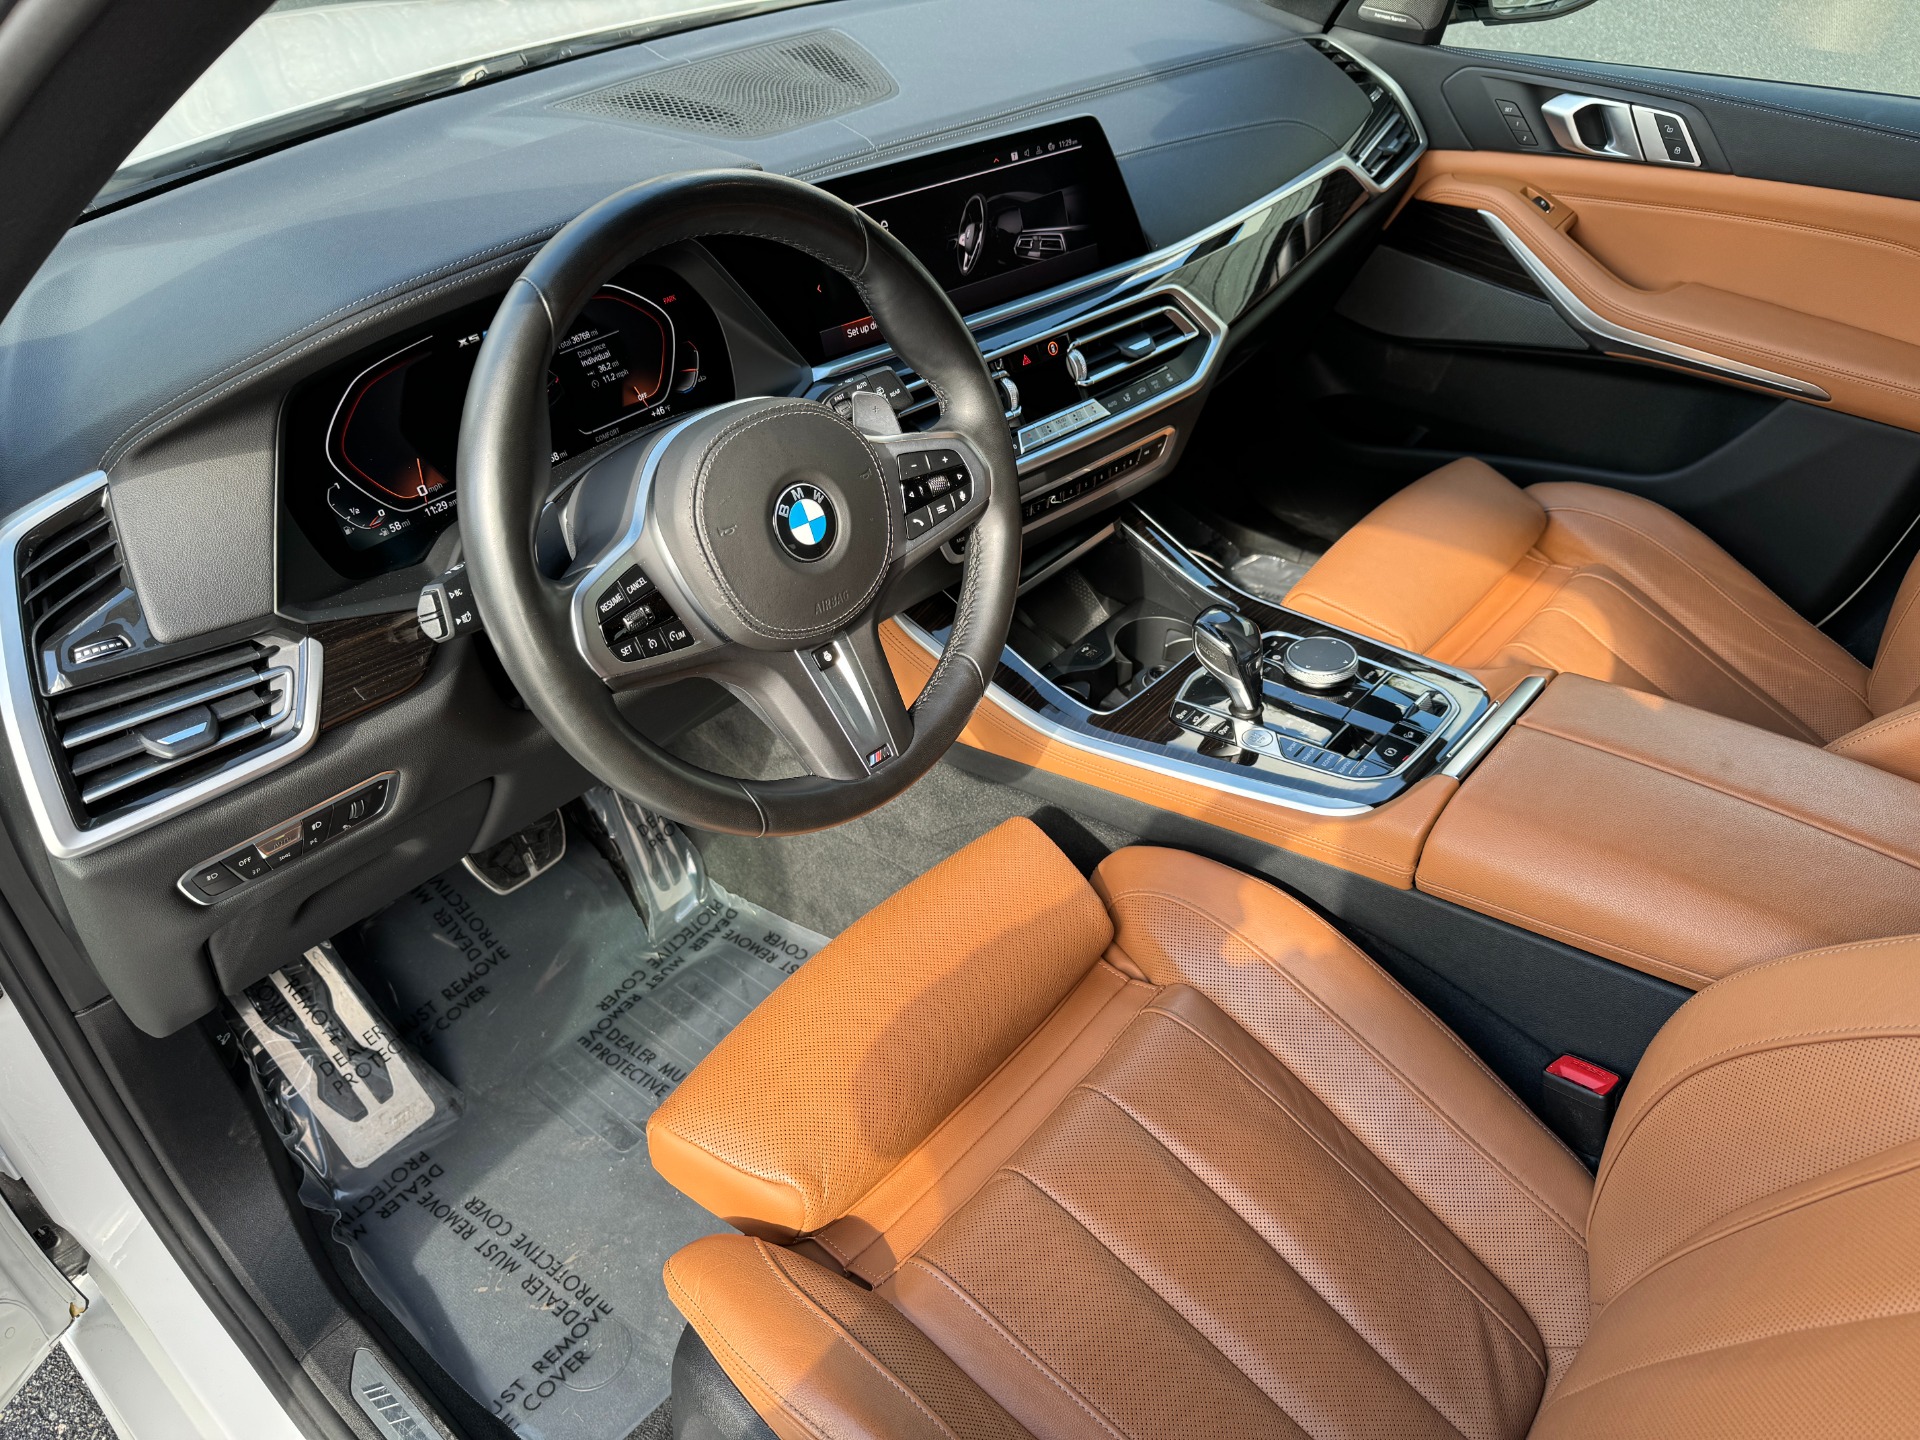 Used 2021 BMW X5 M50i AIR SUSPENSION / COGNAC LEATHER for sale $55,000 at Formula Imports in Charlotte NC 28227 17